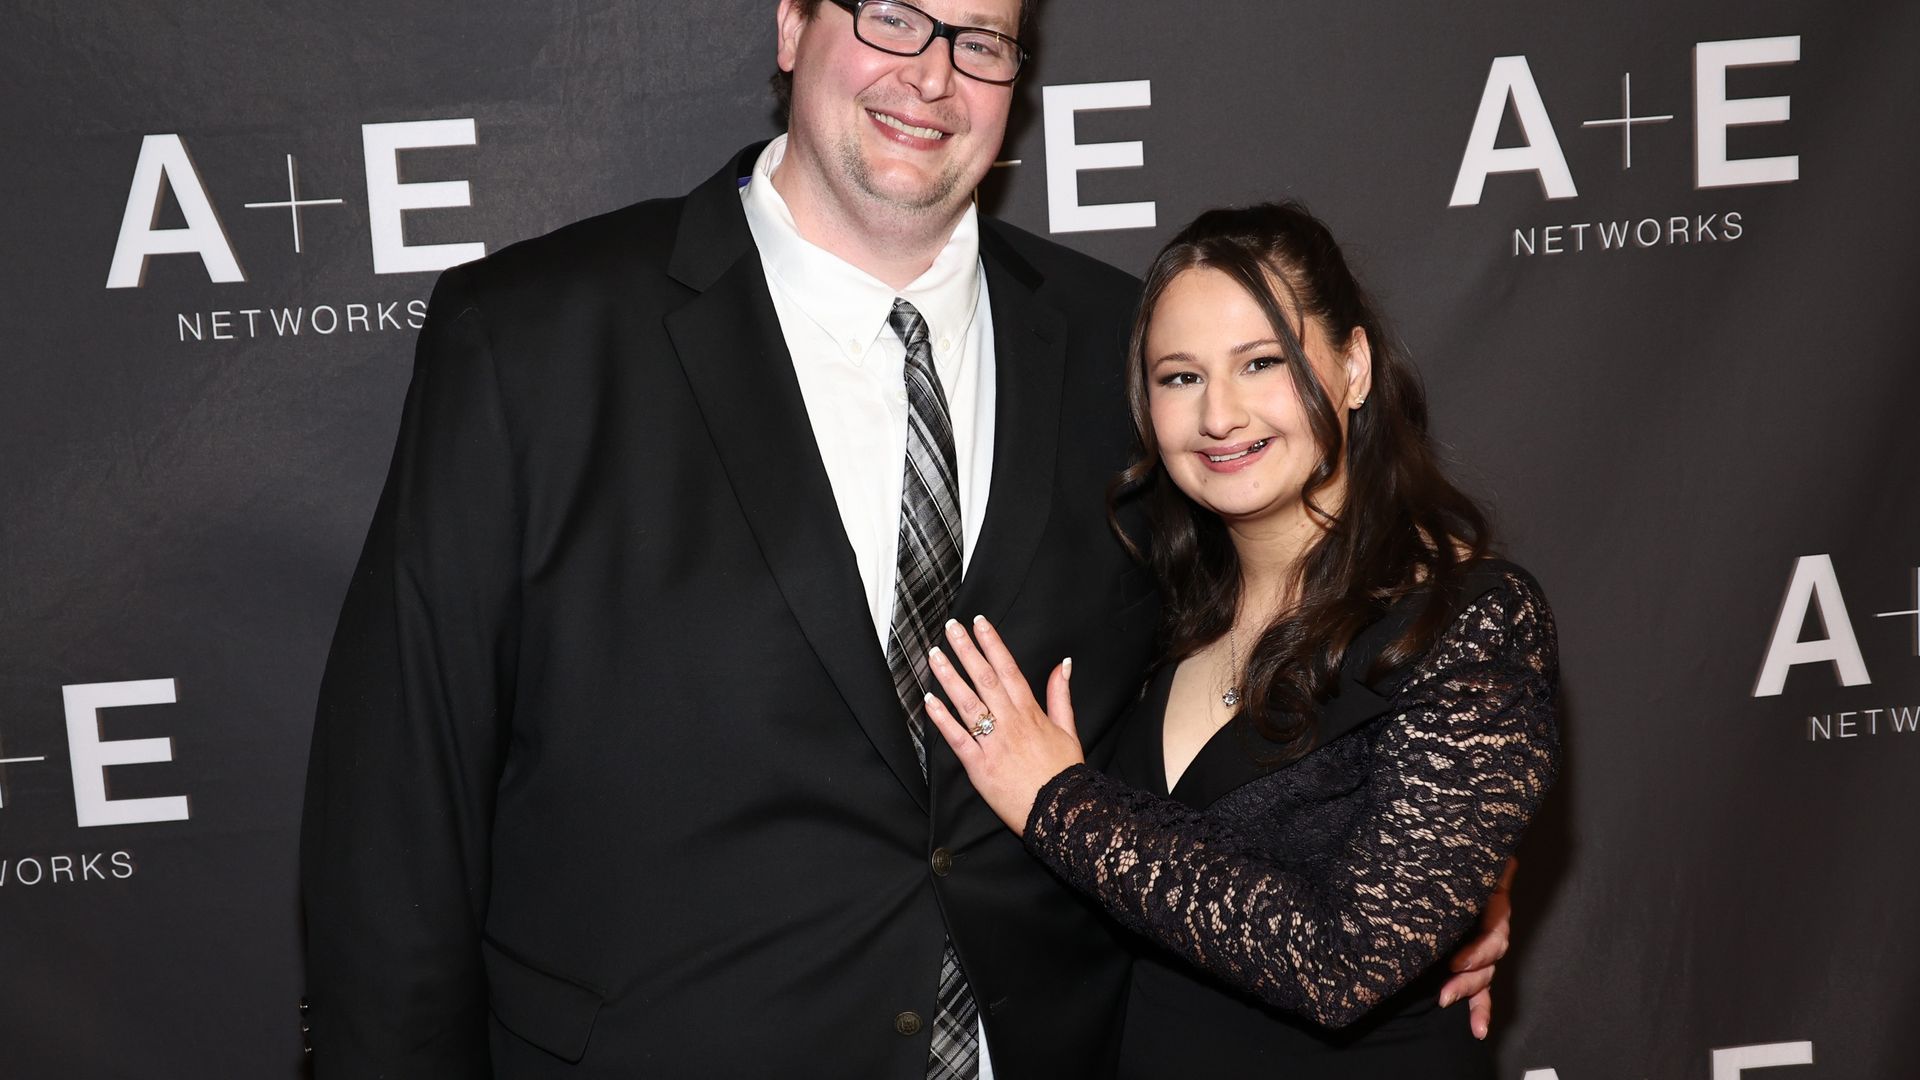 Gypsy Rose Blanchard and husband Ryan Anderson reveal the special moment of how he proposed to her in prison